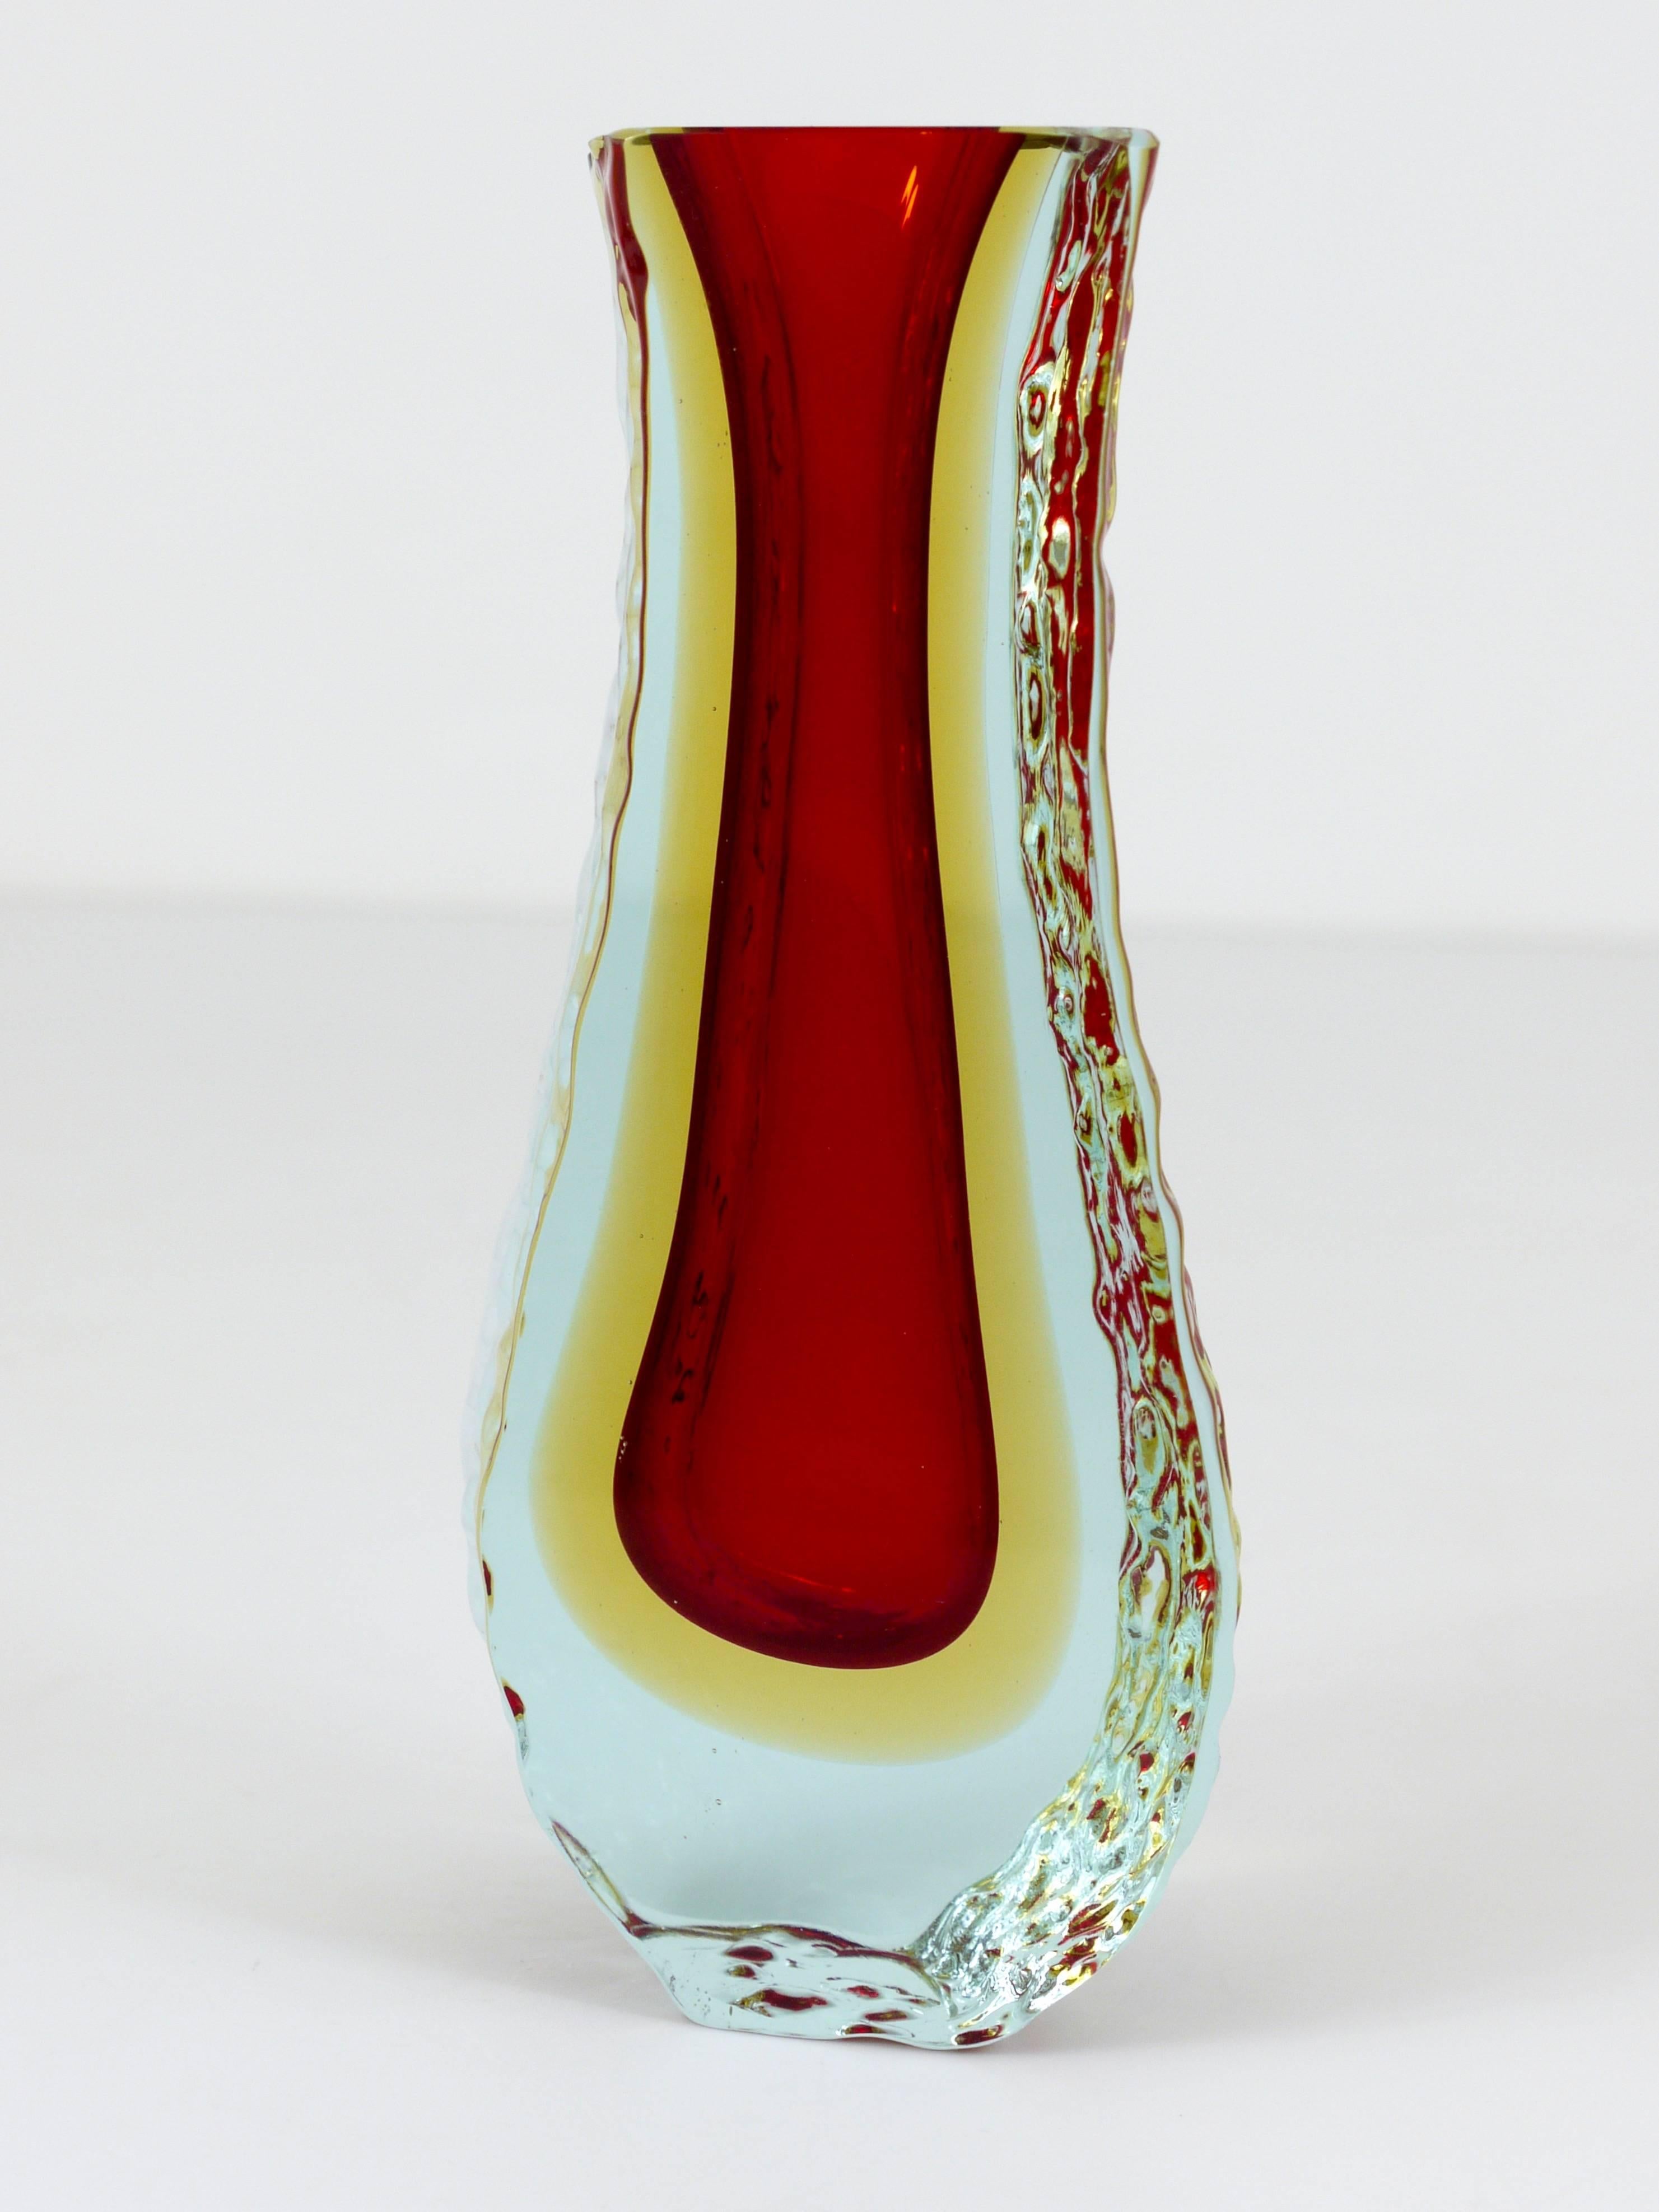 An Italian Sommerso glass vase, executed by Mandruzzato in the 1960s in Murano. It has a wonderful shape with polished front and back and textured sides.  A beautiful combination of three colours, red, yellow, yellow and light blue glass. In